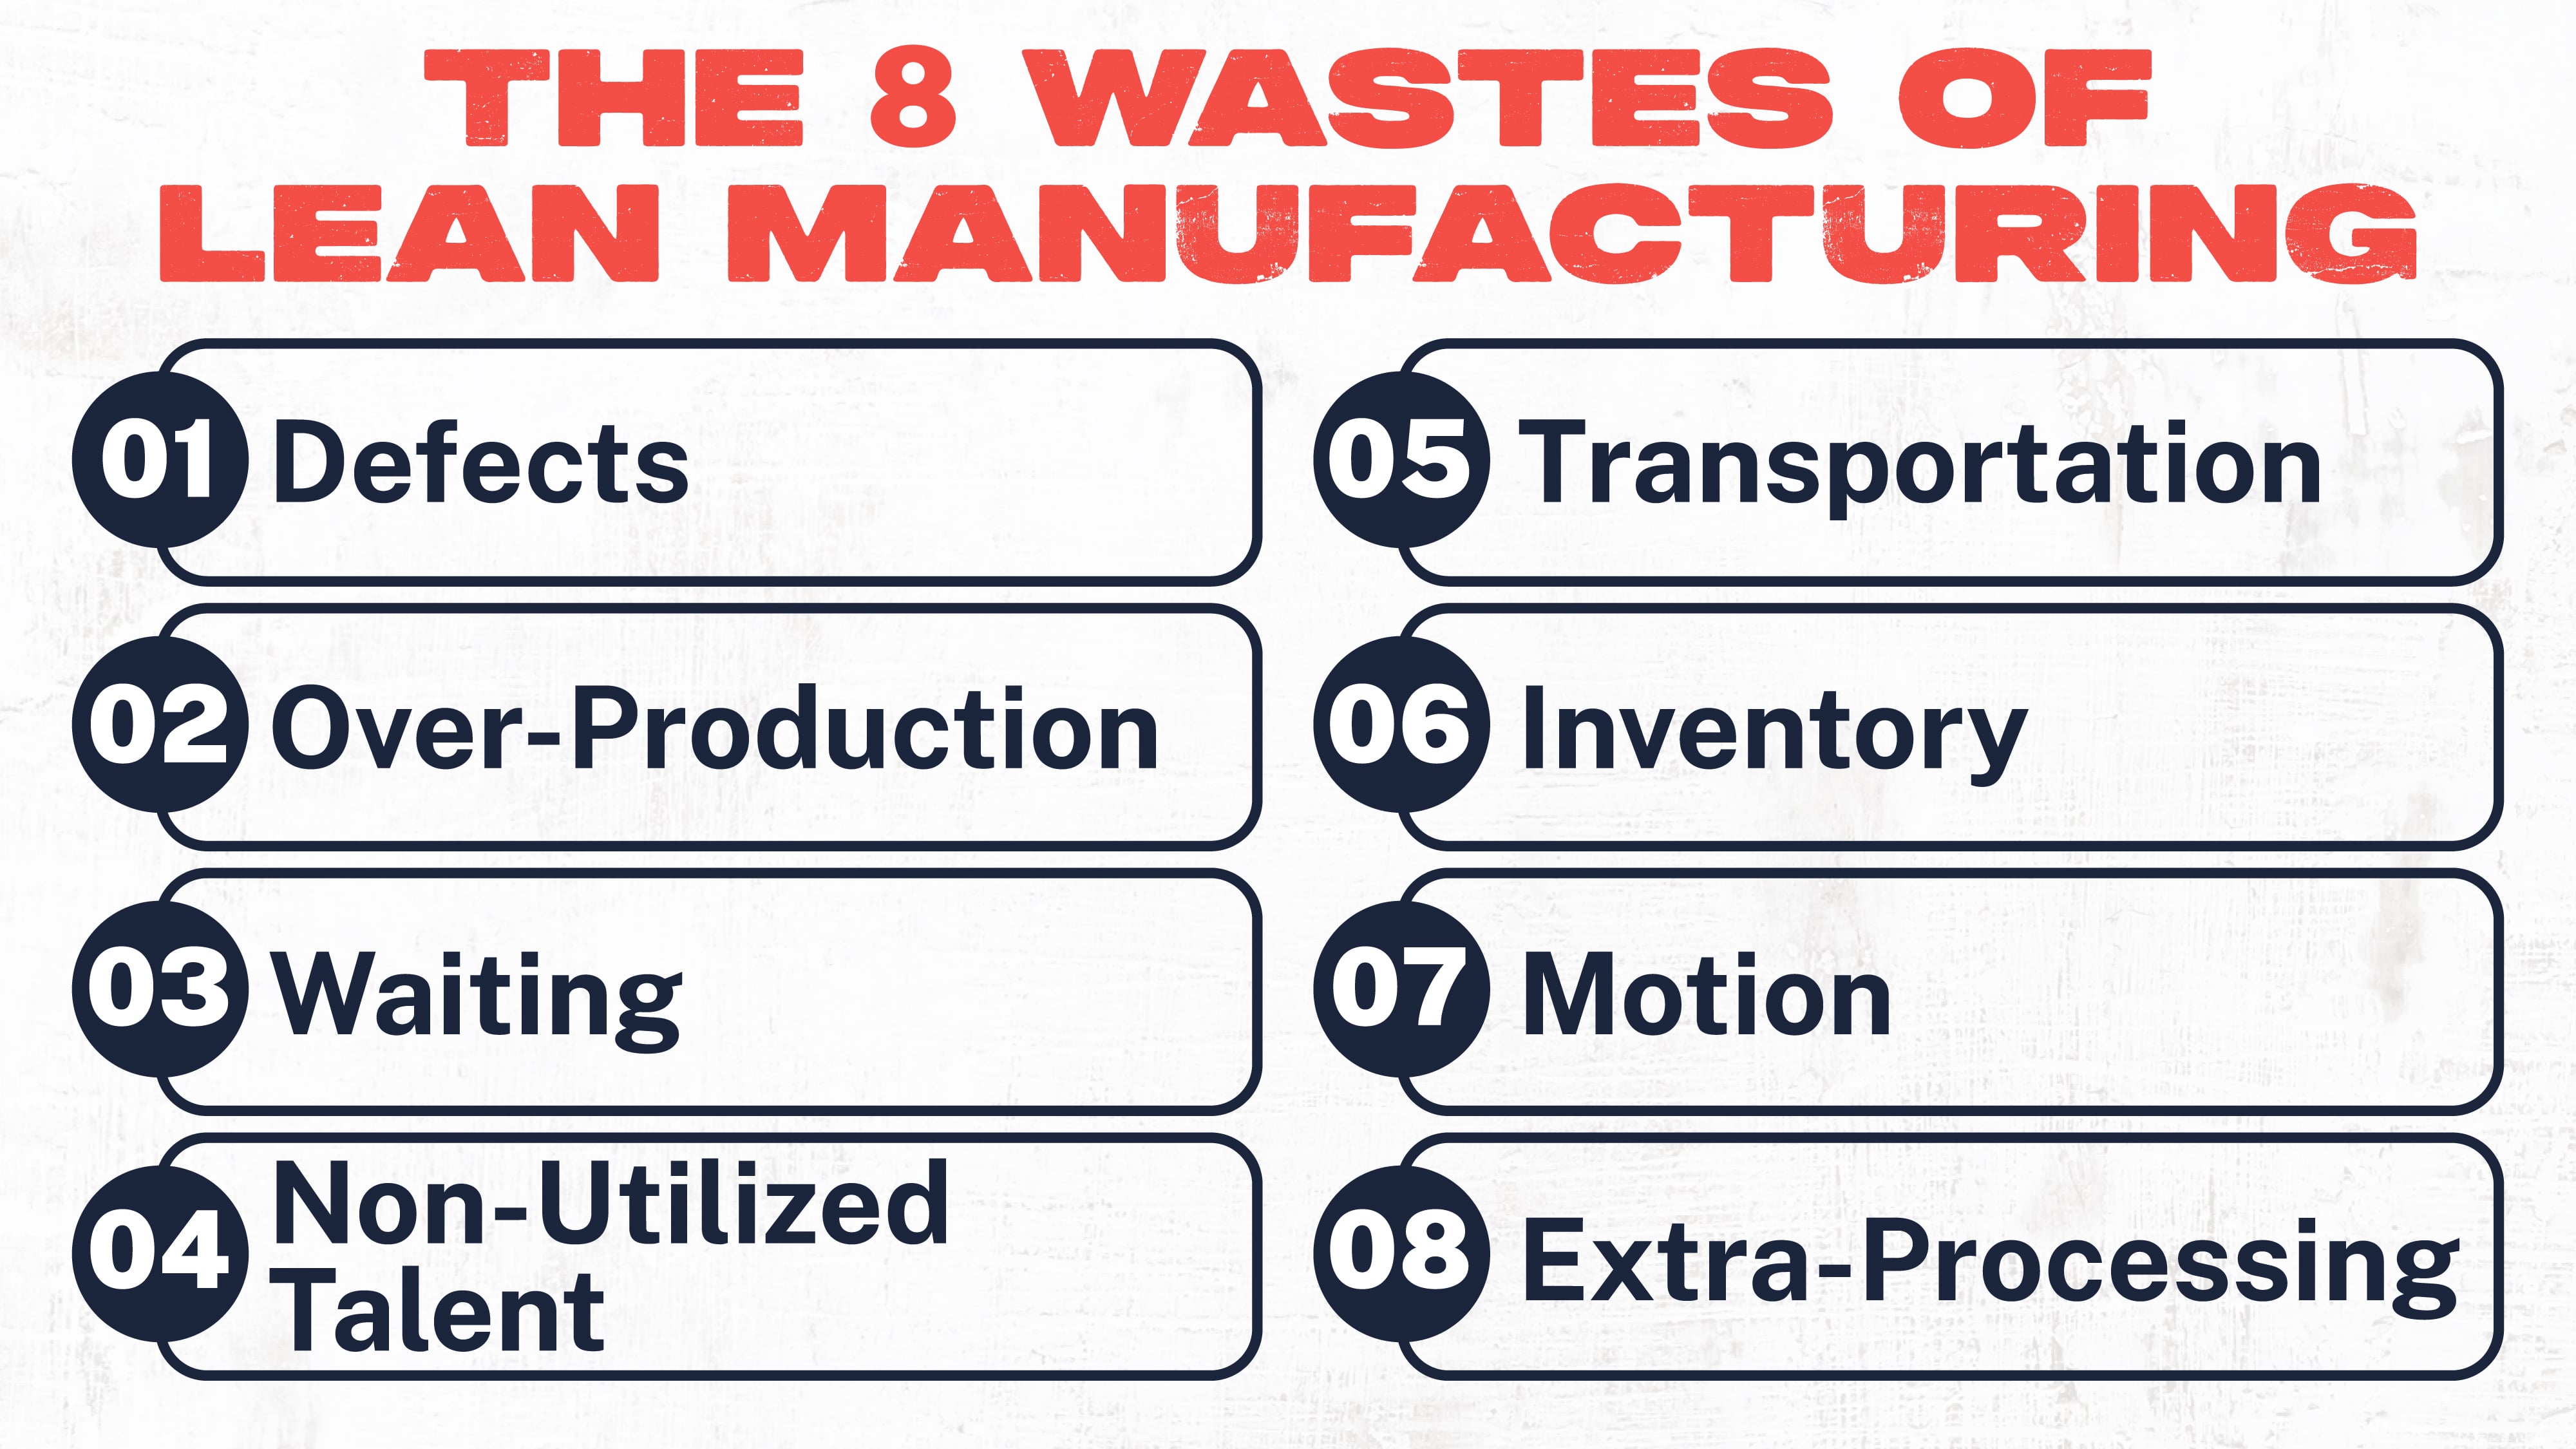 THE 8 WASTES OF LEAN MANUFACTURING